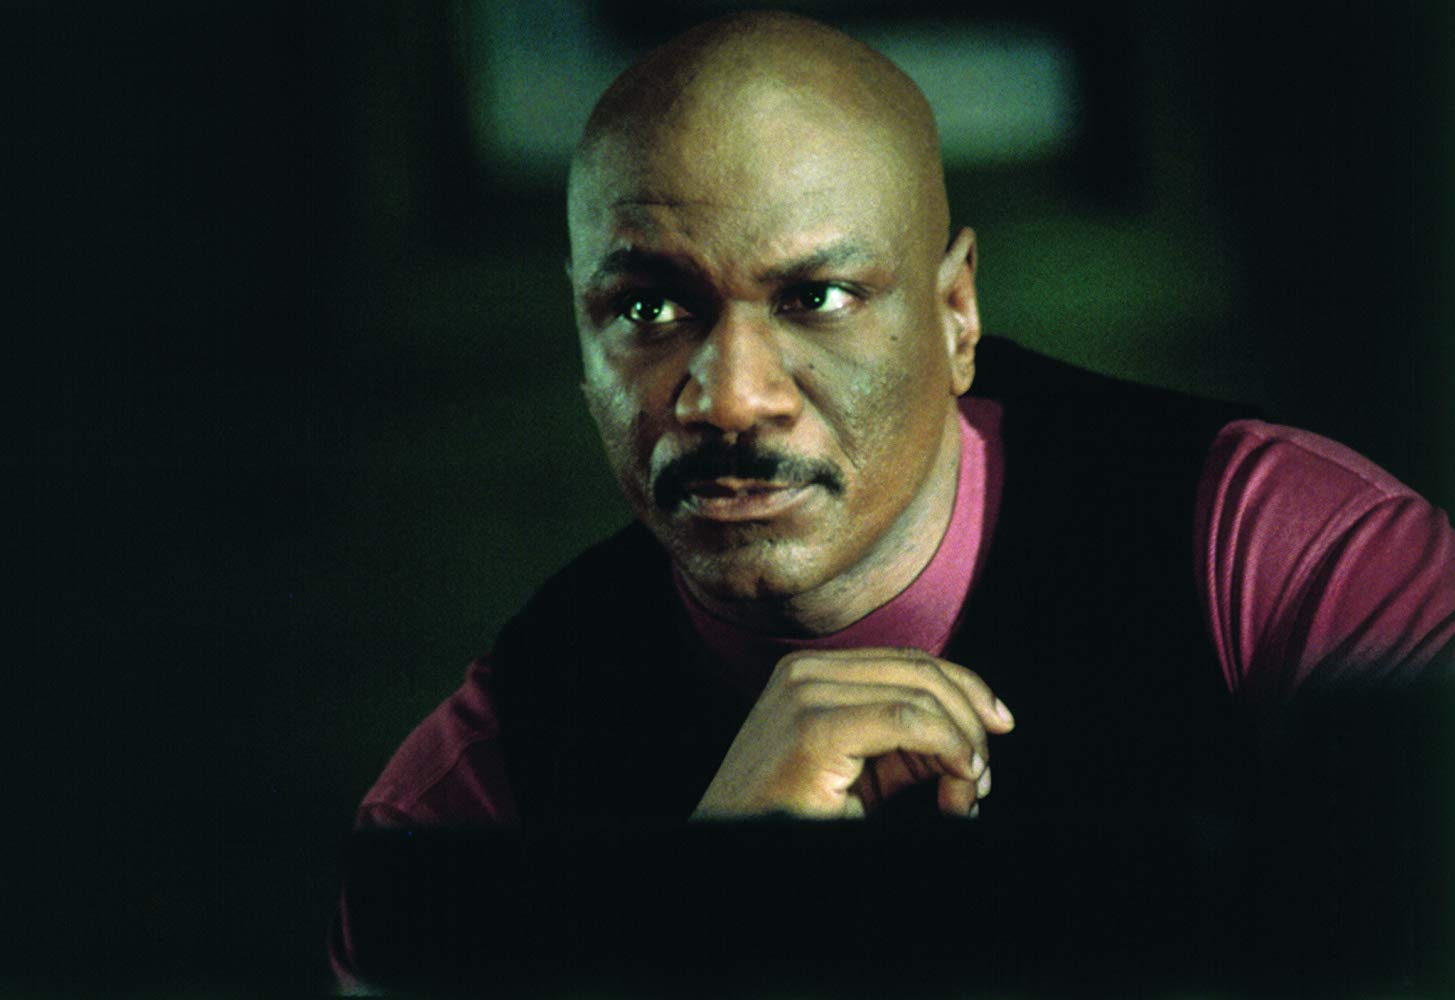 Ving Rhames in "Mission: Impossible II" in 2000 | Source: IMDB